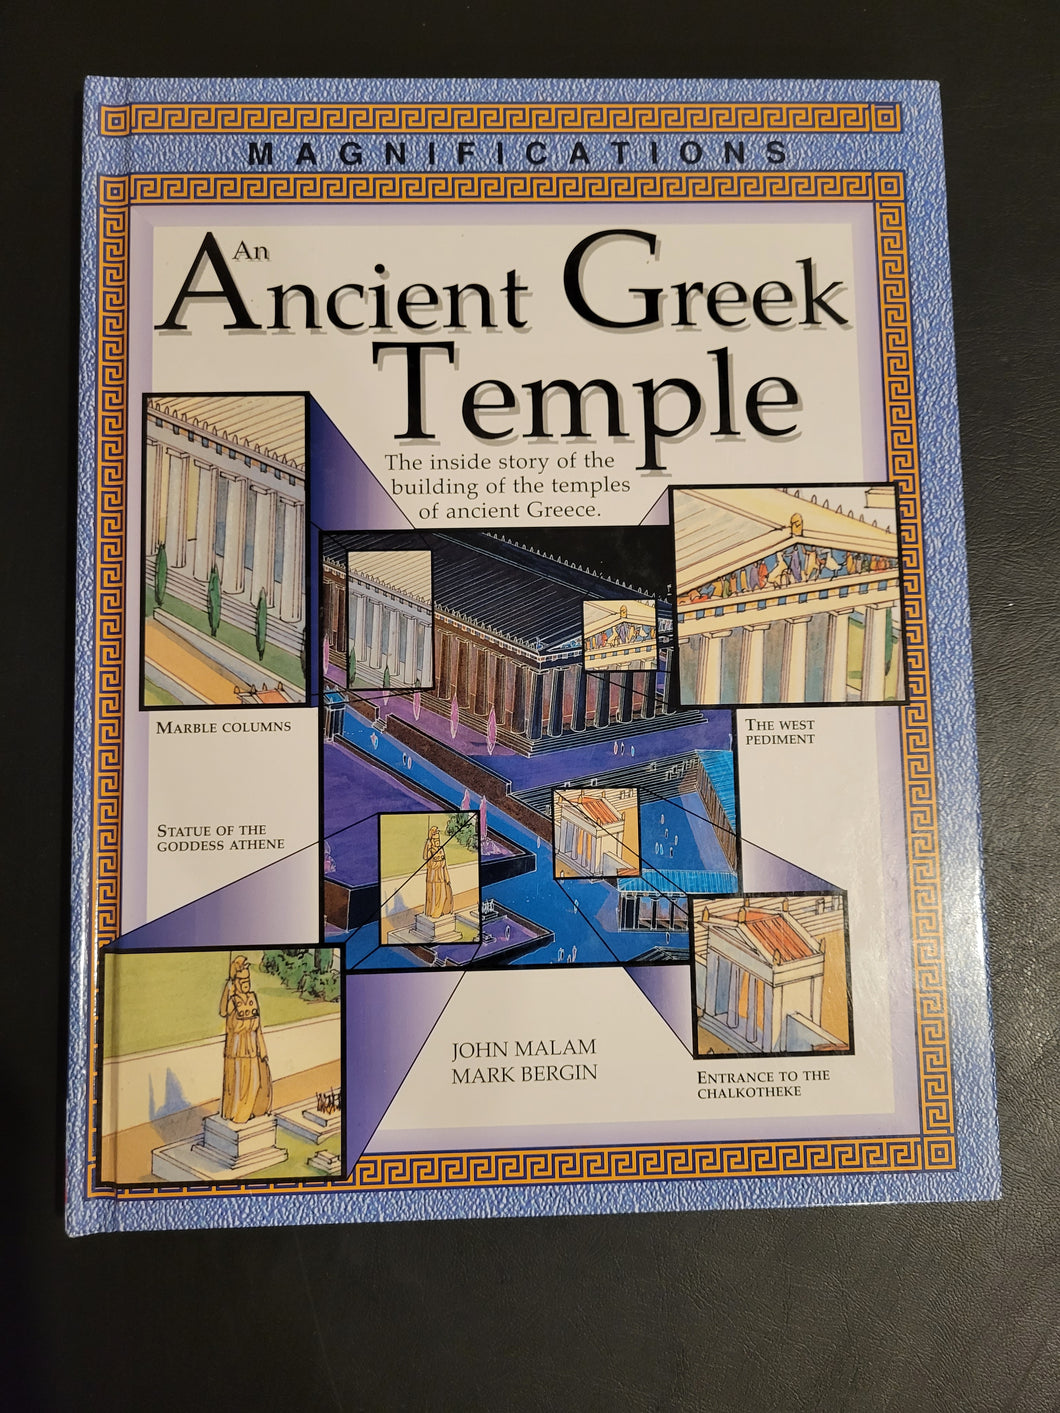 An Ancient Greek Temple (Magnifications) by John Malam